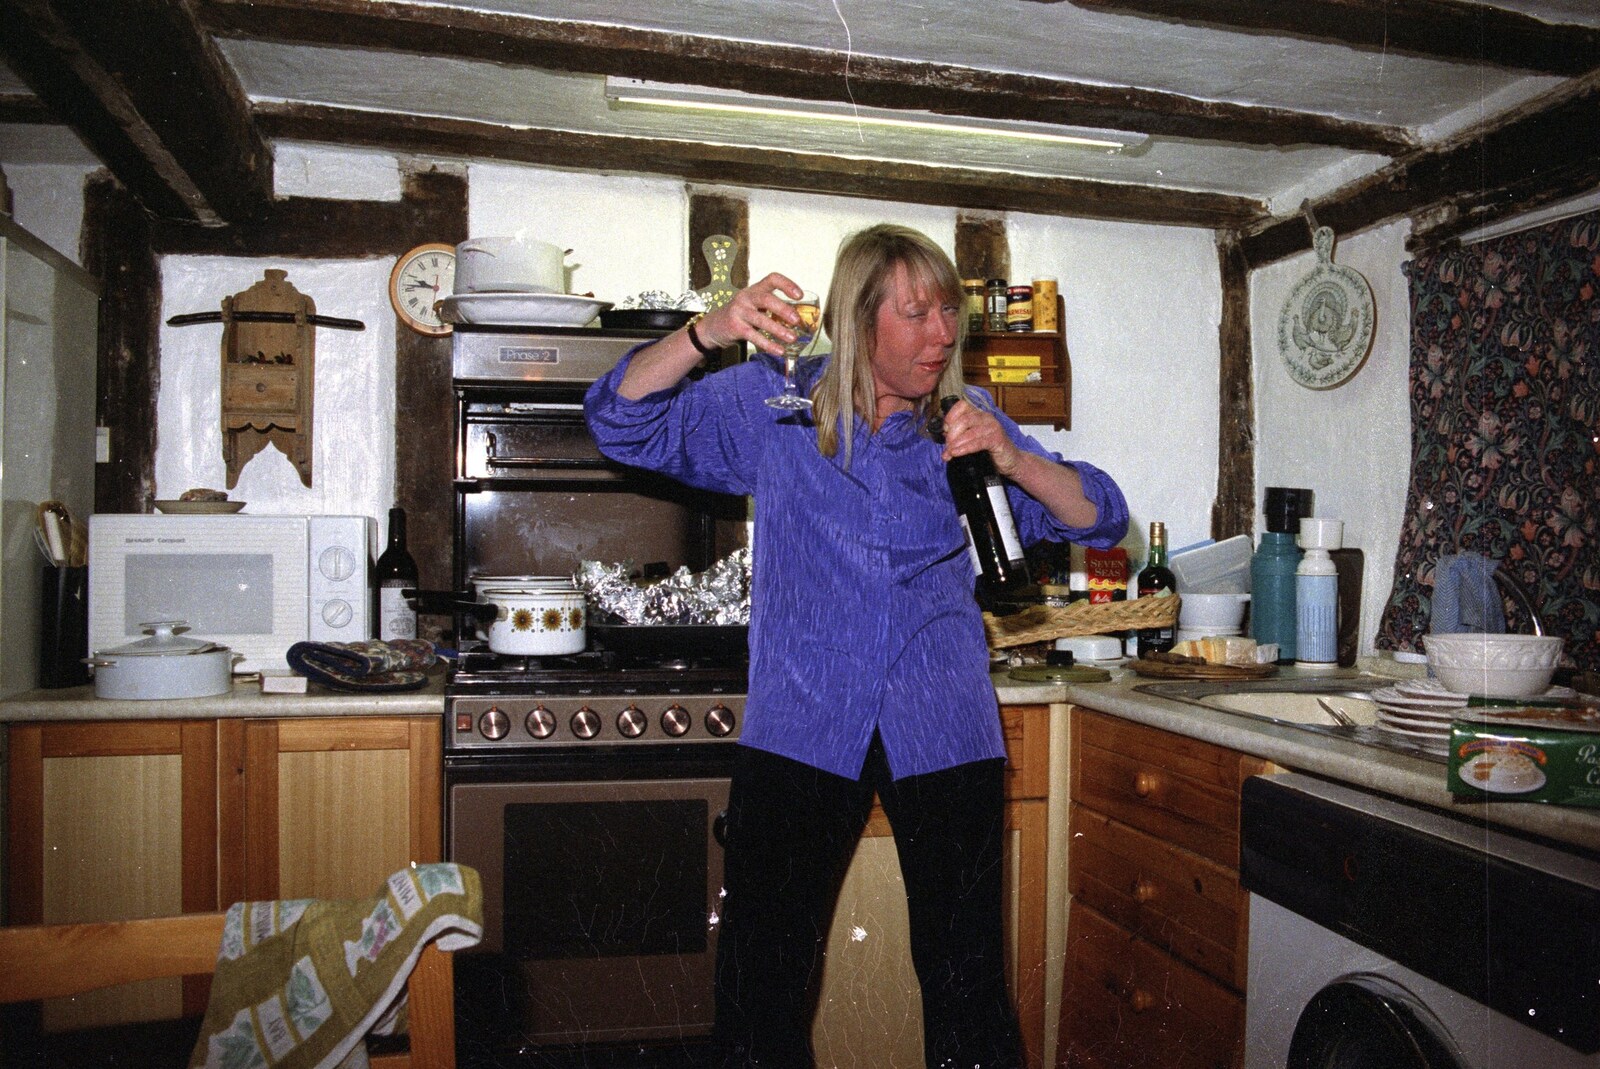 Slurping from the bottle of wine from Lunch and Dinner at Mad Sue's, Stuston, Suffolk - 30th March 1995